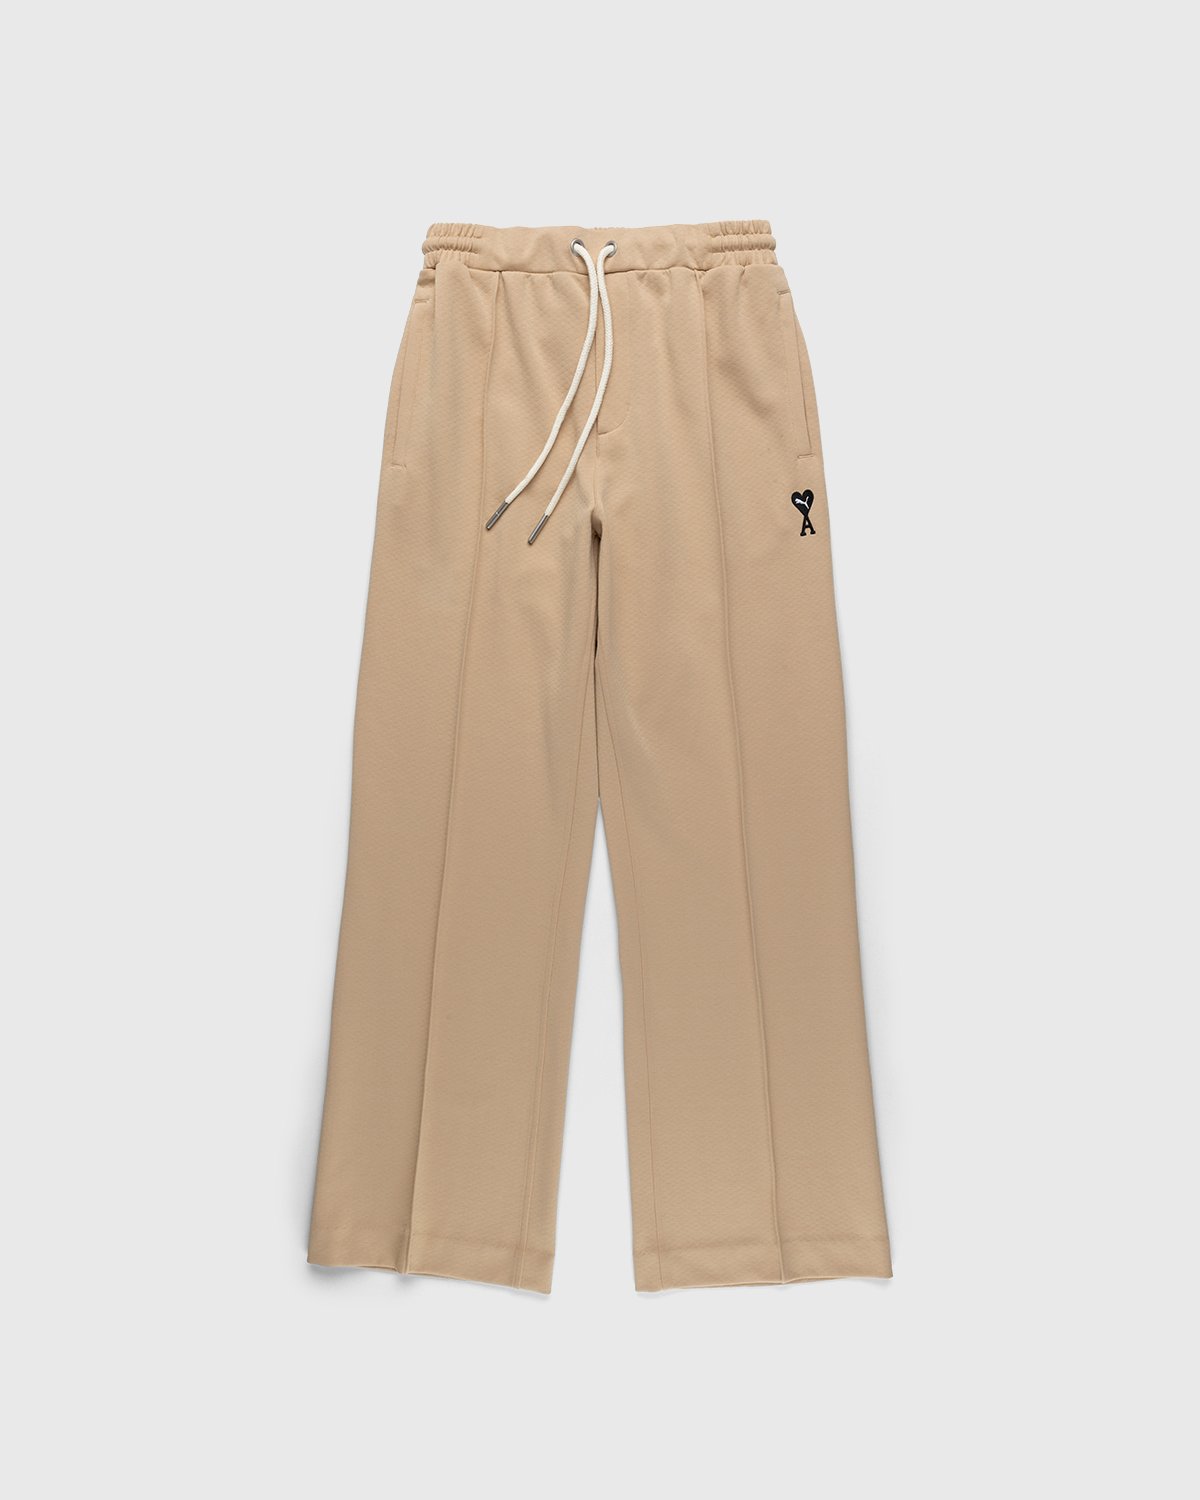 Puma x AMI - Wide Logo Pants Ginger Root - Clothing - Beige - Image 1